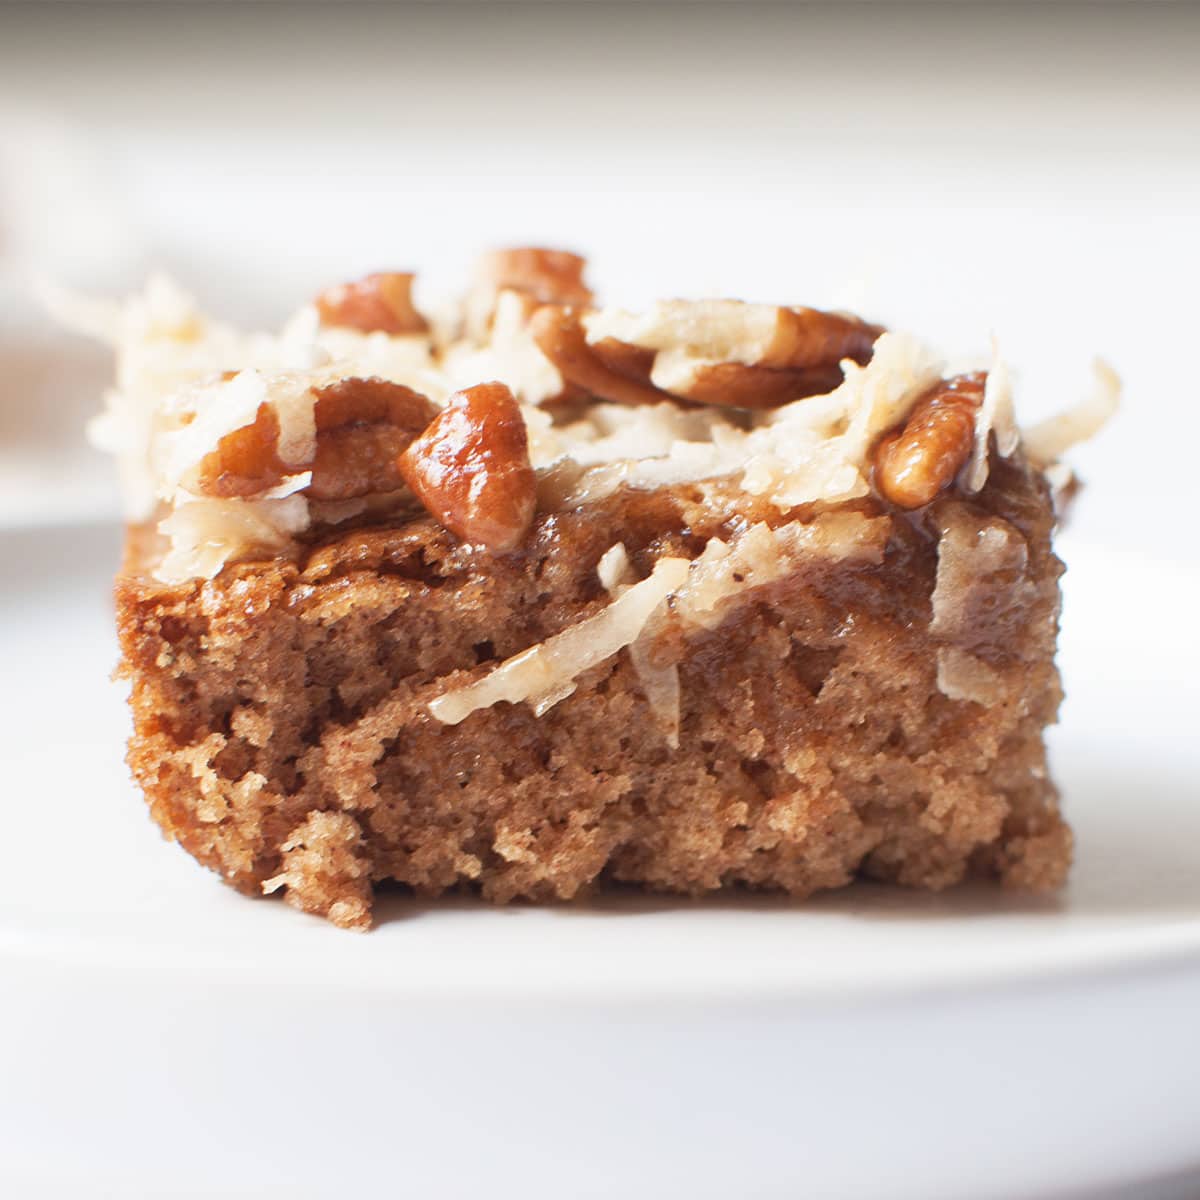 A slice of Amish cake on a white plate (oatmeal cake with a coconut pecan topping).